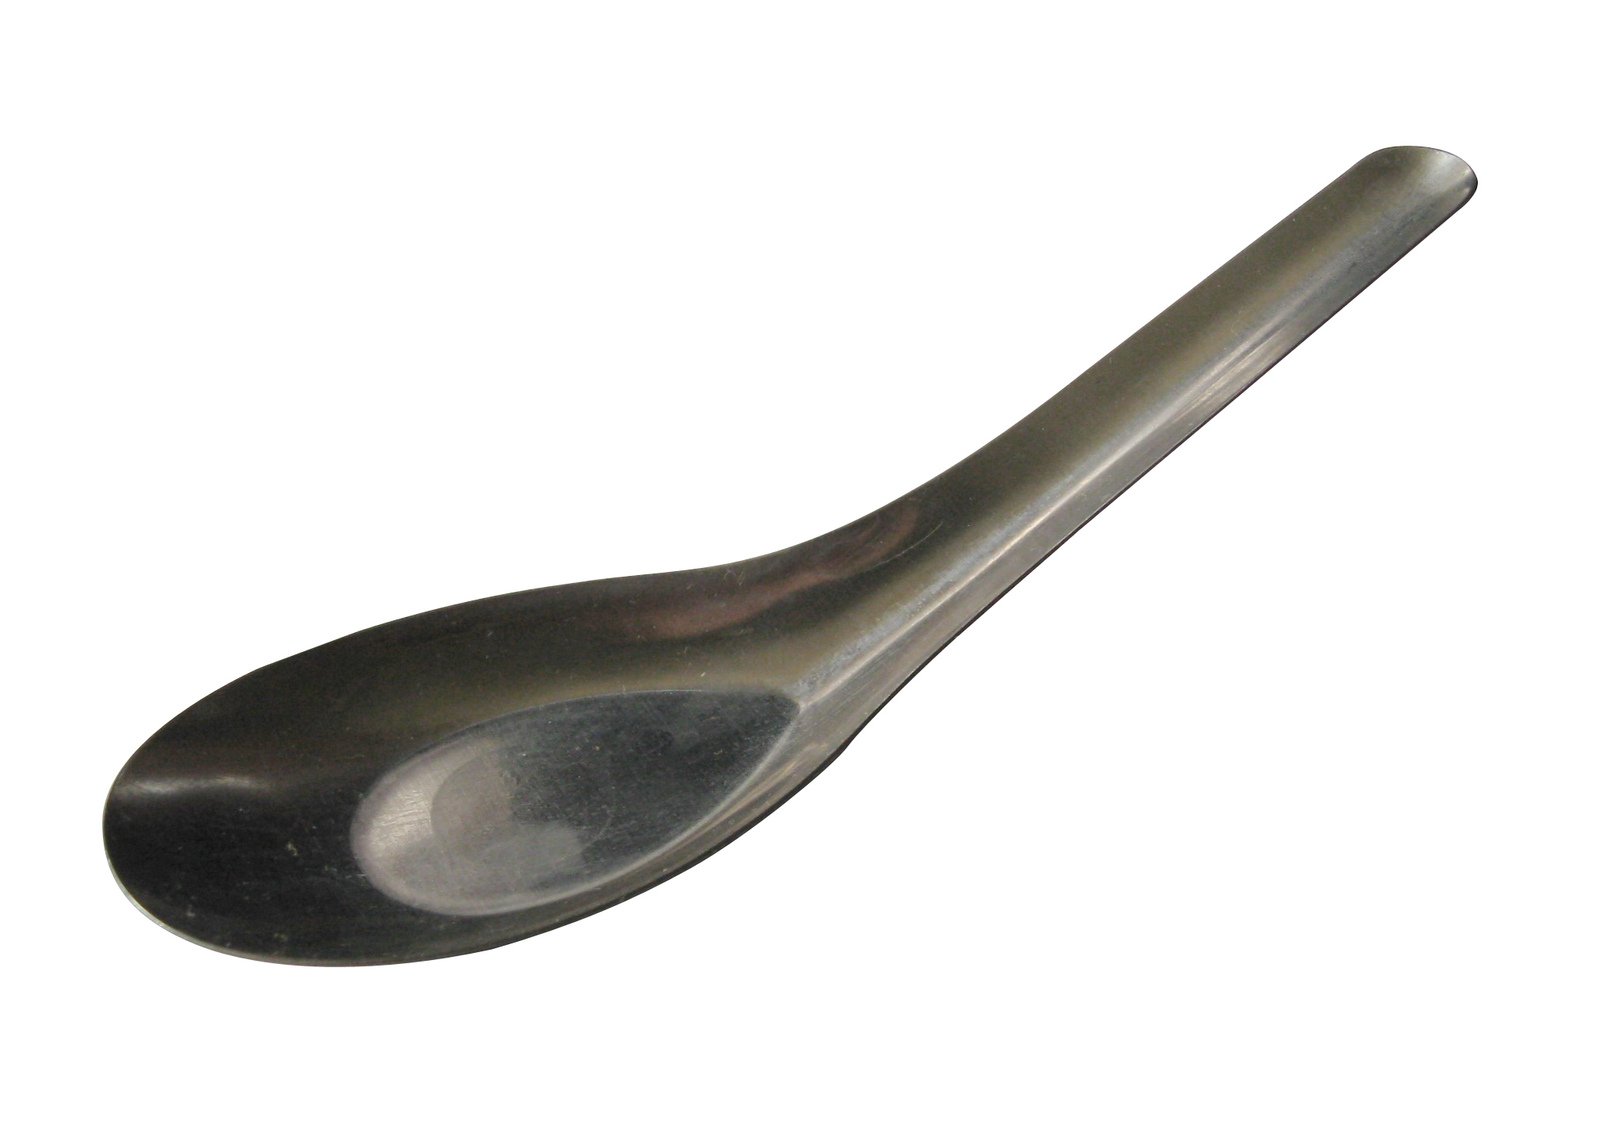 an antique spoon from the nineteenth century sitting on top of an easel